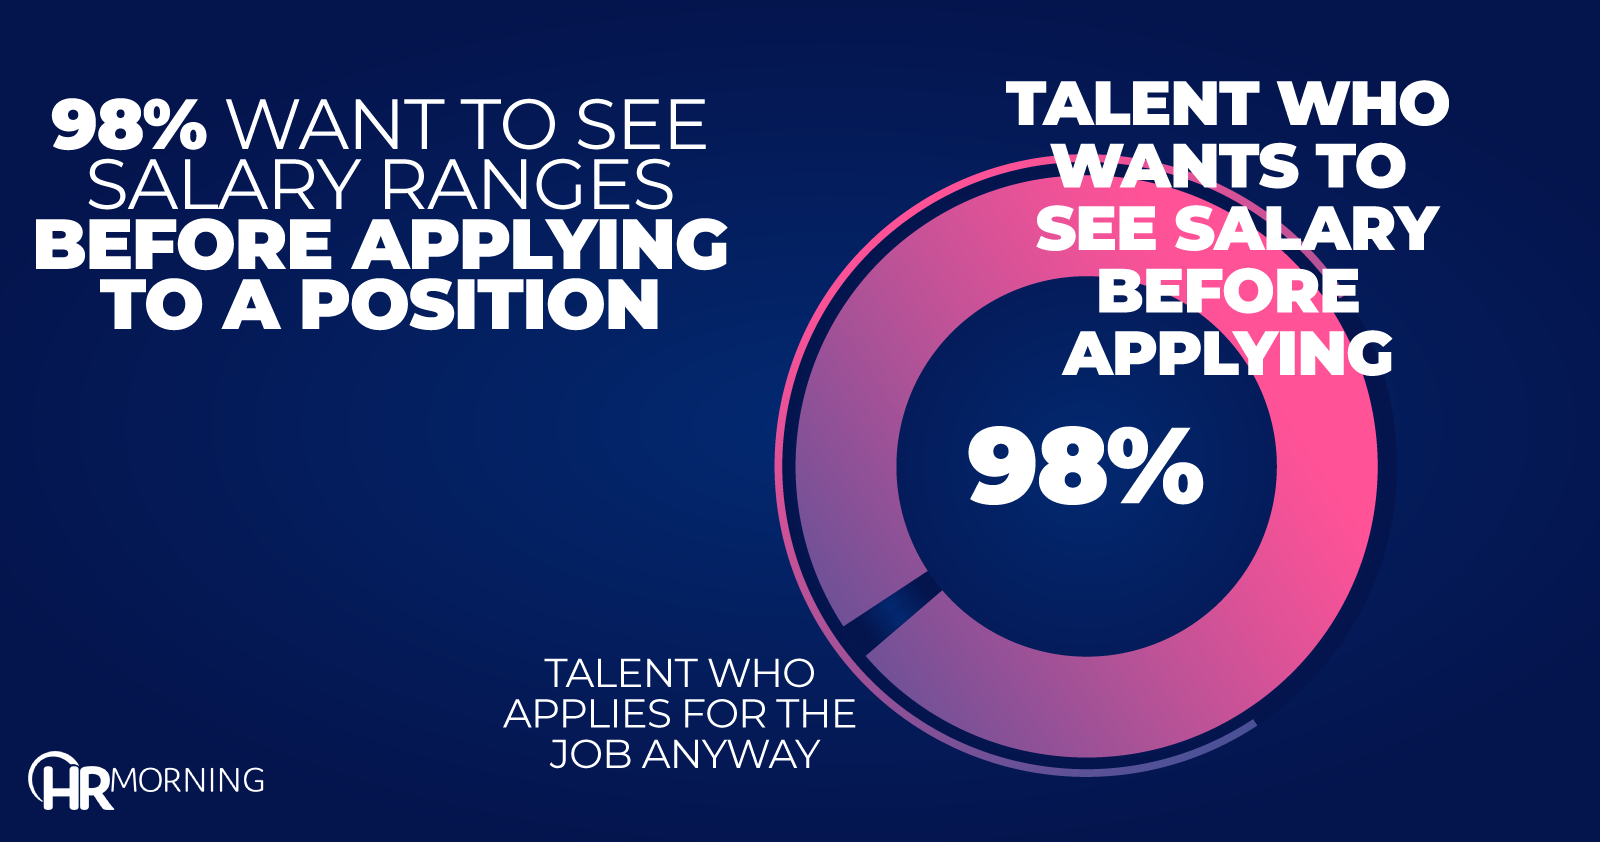 98% Want To See Salary Before ApplyingT o A Position